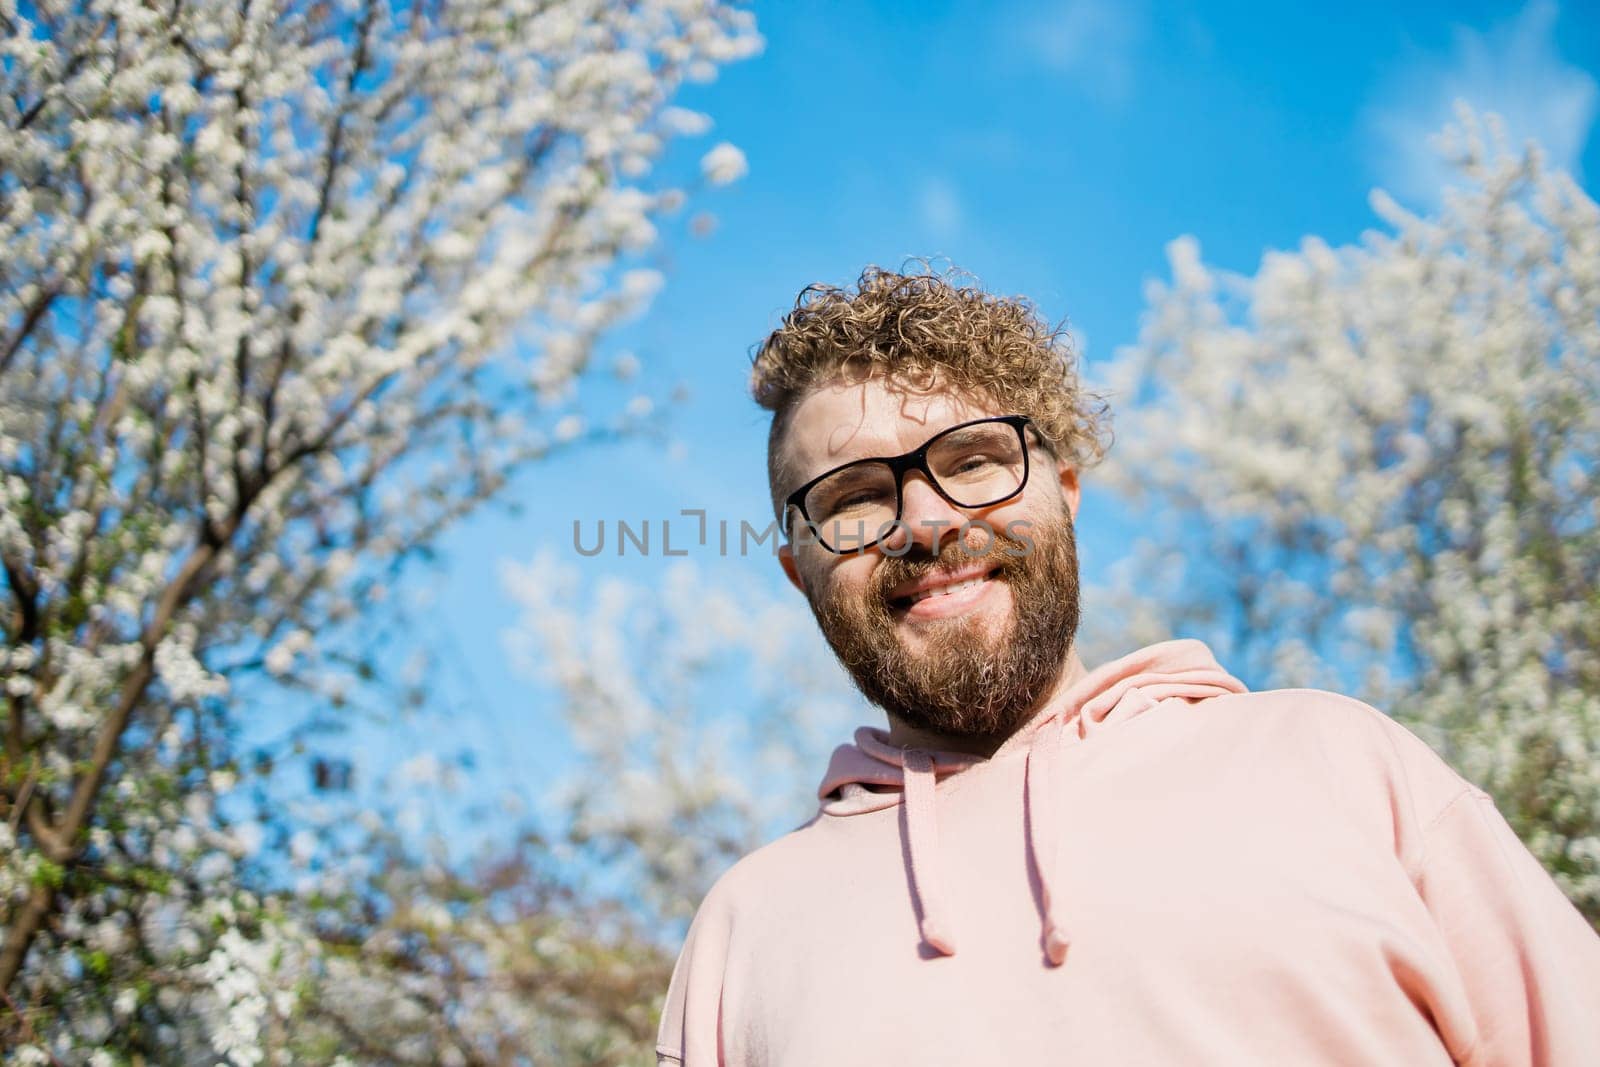 Handsome man outdoors portrait on background cherry blossoms or apple blossoms and blue spring sky. Millennial generation guy and new masculinity concept by Satura86